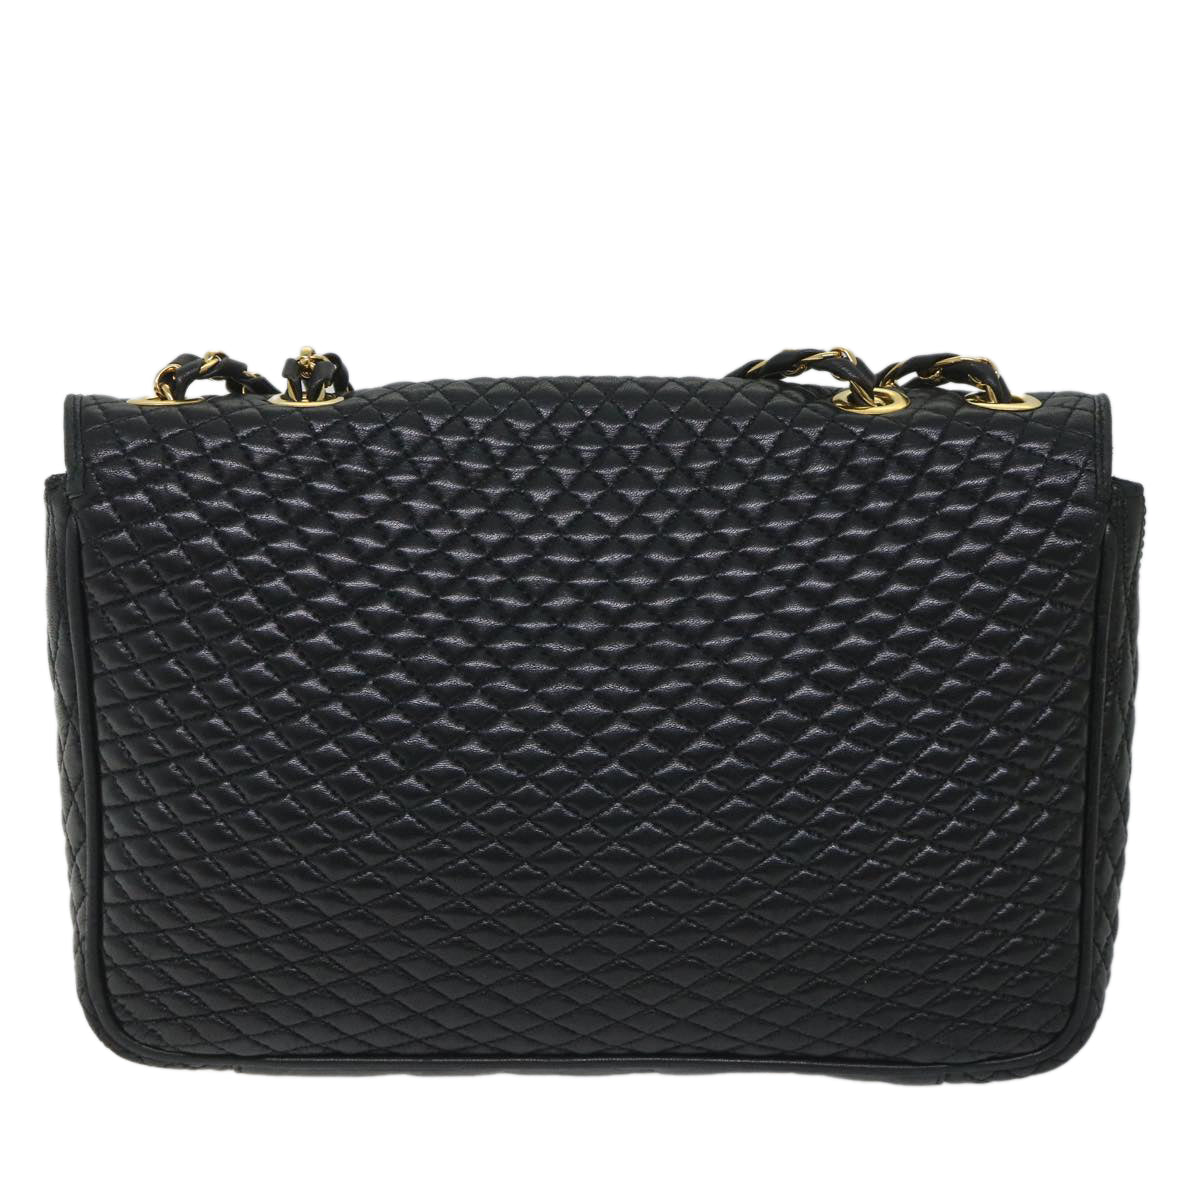 BALLY Chain Quilted Shoulder Bag Leather Black Auth 57285 - 0